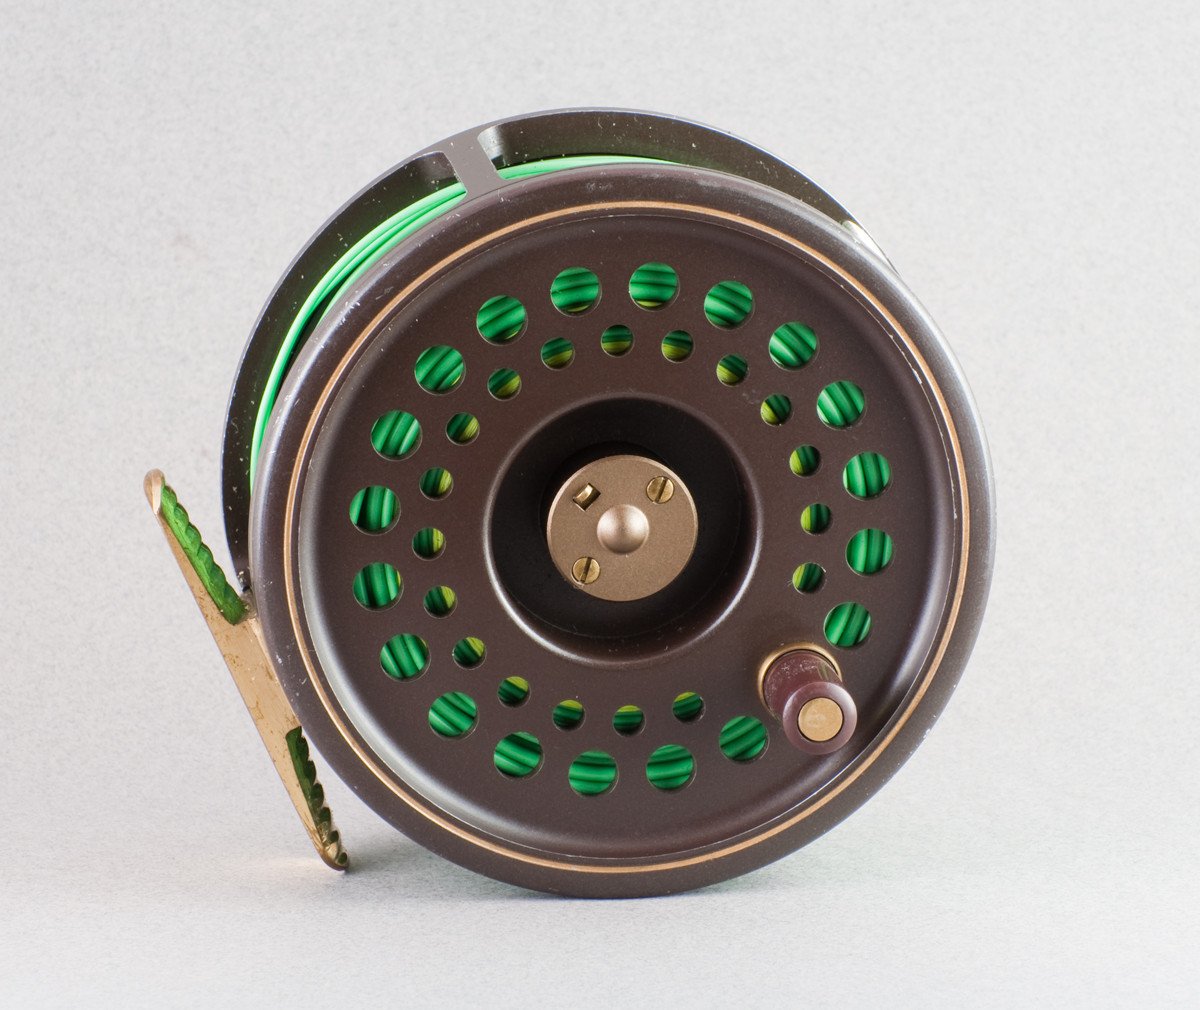 Classic Hardy Fly Reels For Sale Page 40 - Spinoza Rod Company